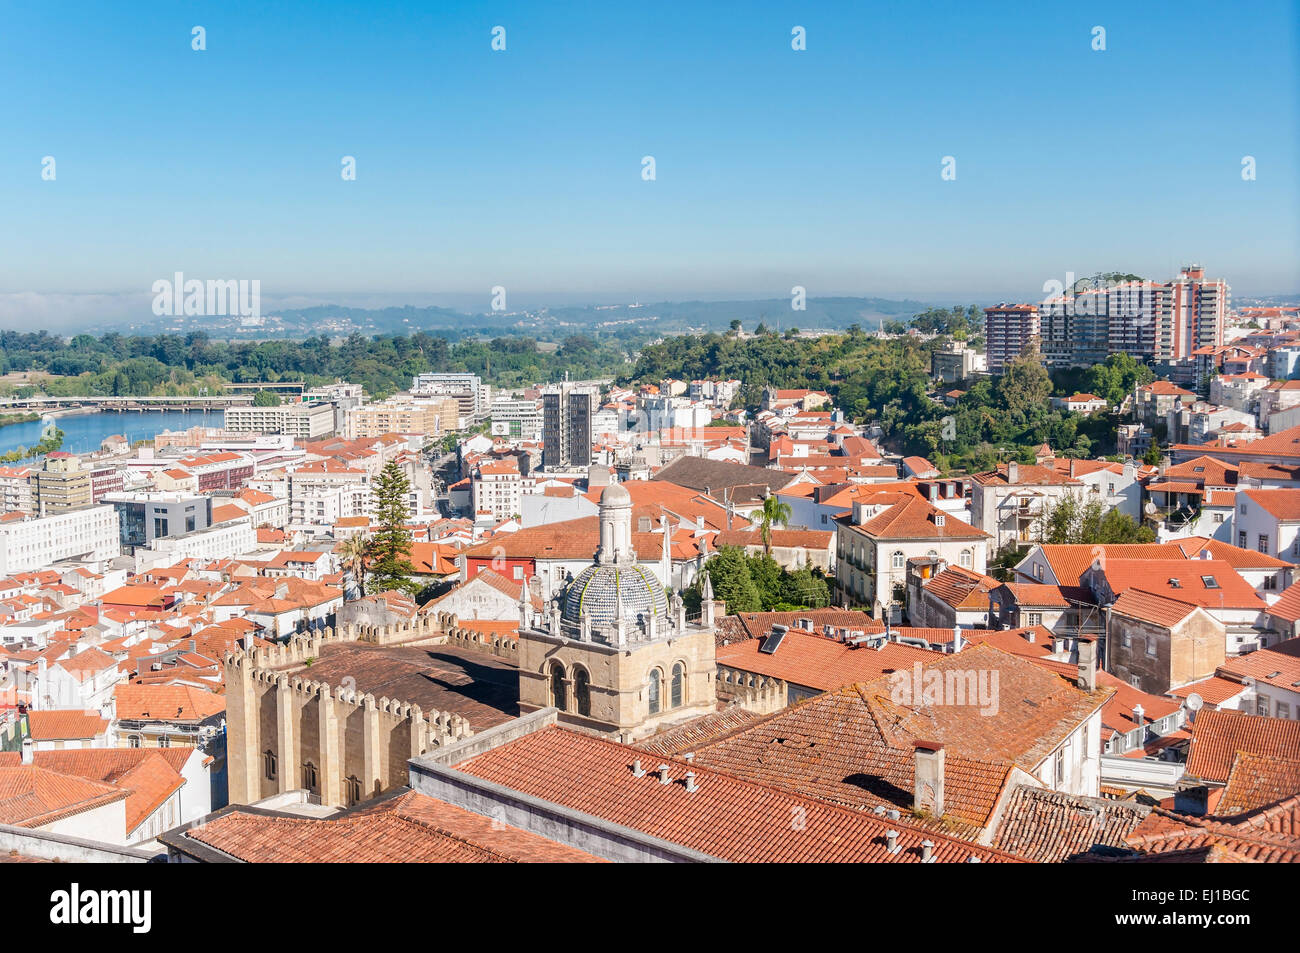 Cityscape over the roofs of Coimbra with The Old Cathedral of Coimbra, Portugal Stock Photo